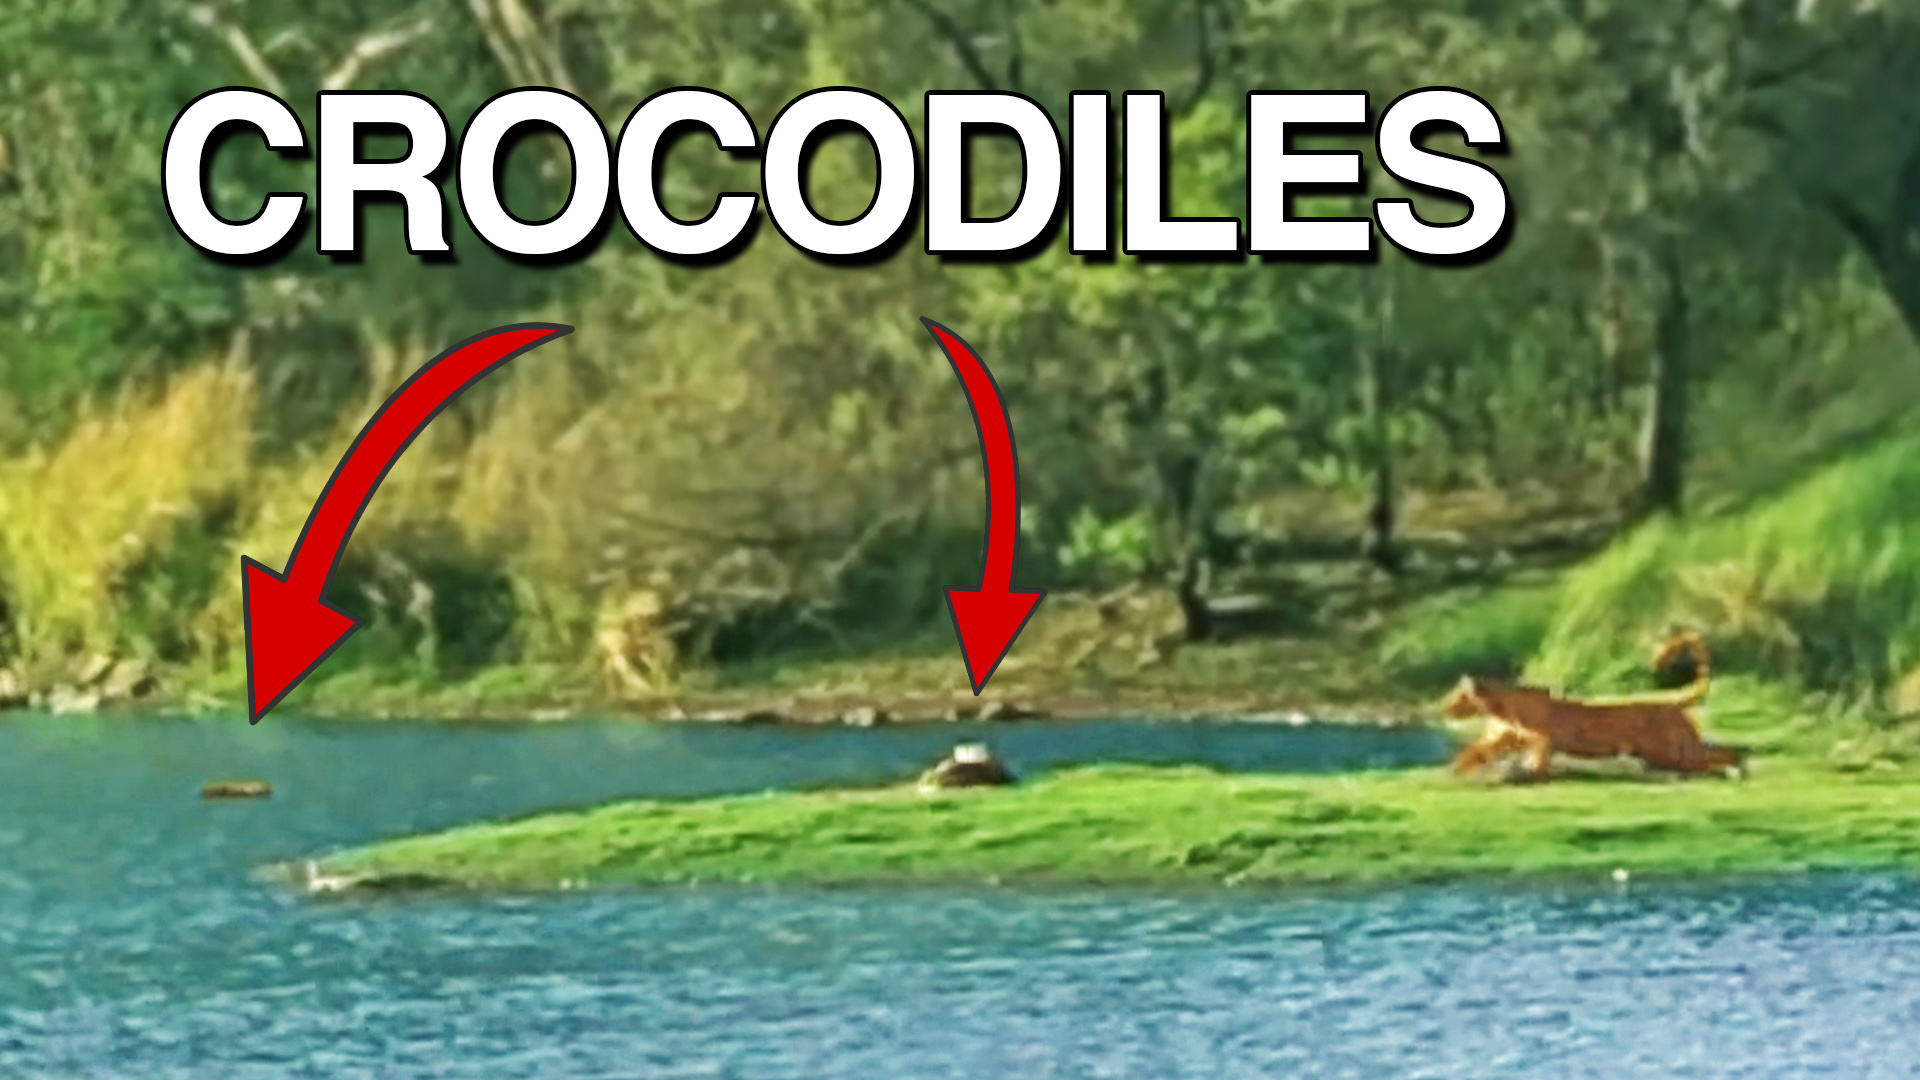 Tiger Hunts Crocodile but gets Attacked Instead